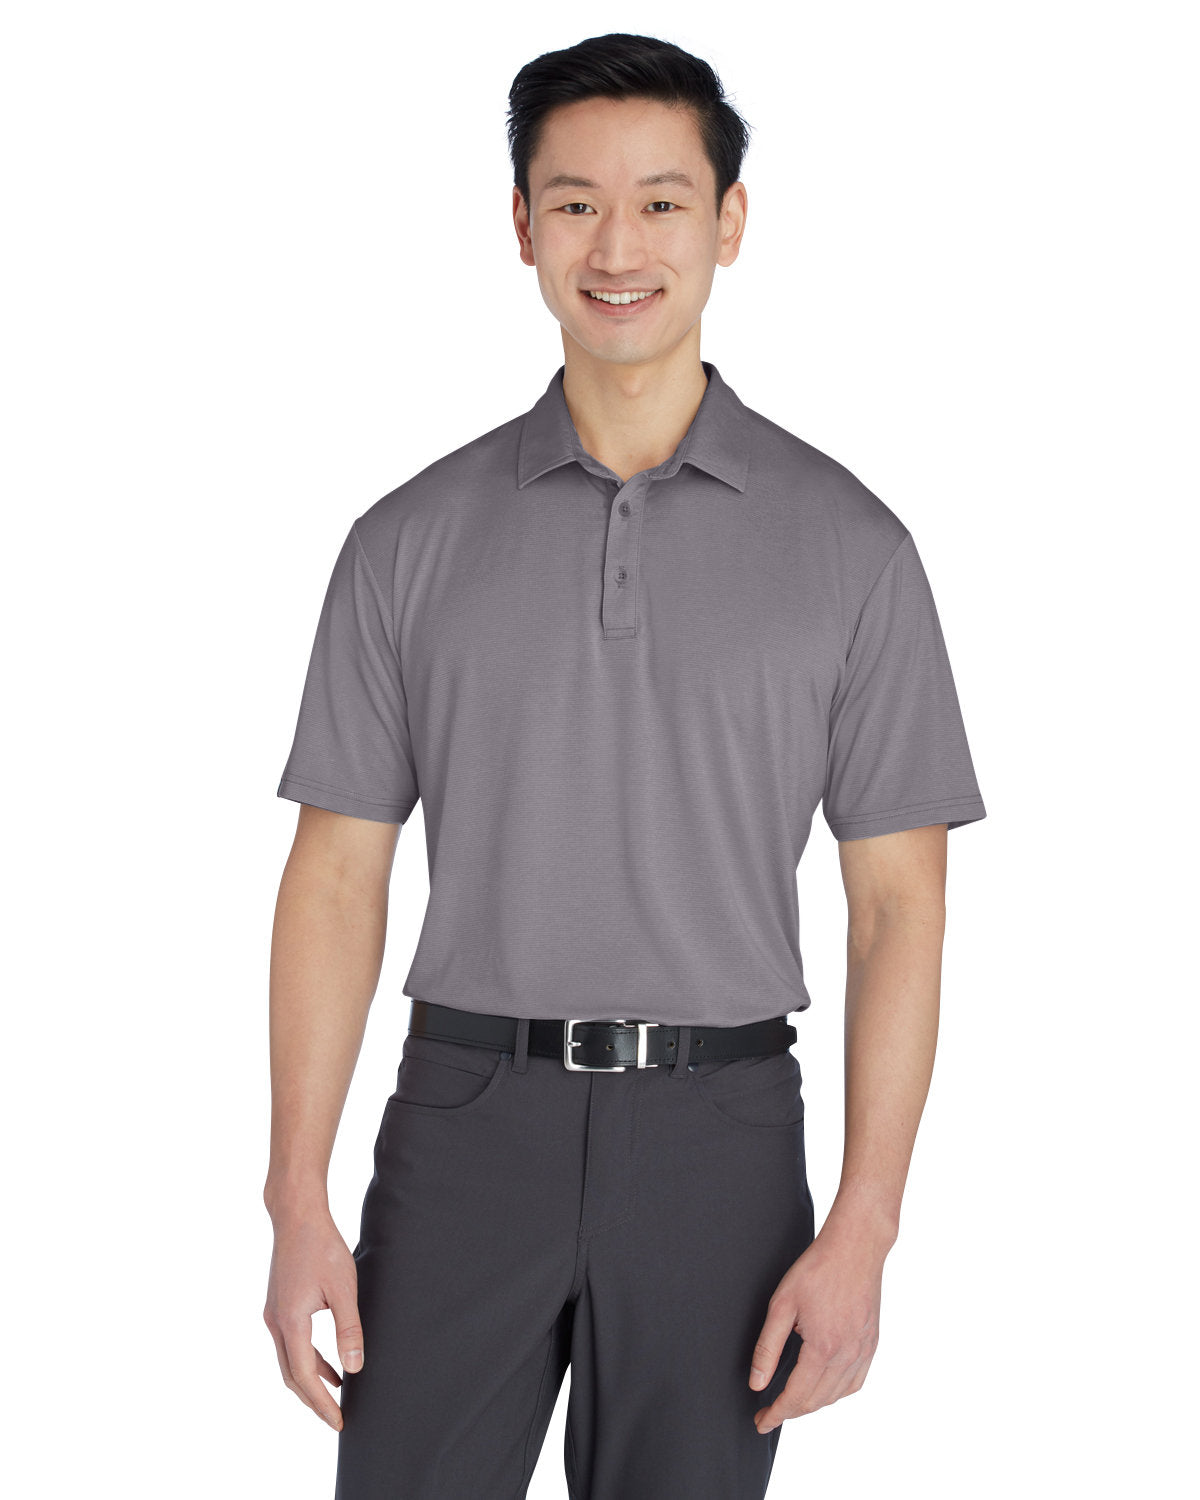 SW1000-SwanniesGolf-43-CHARCOAL-S